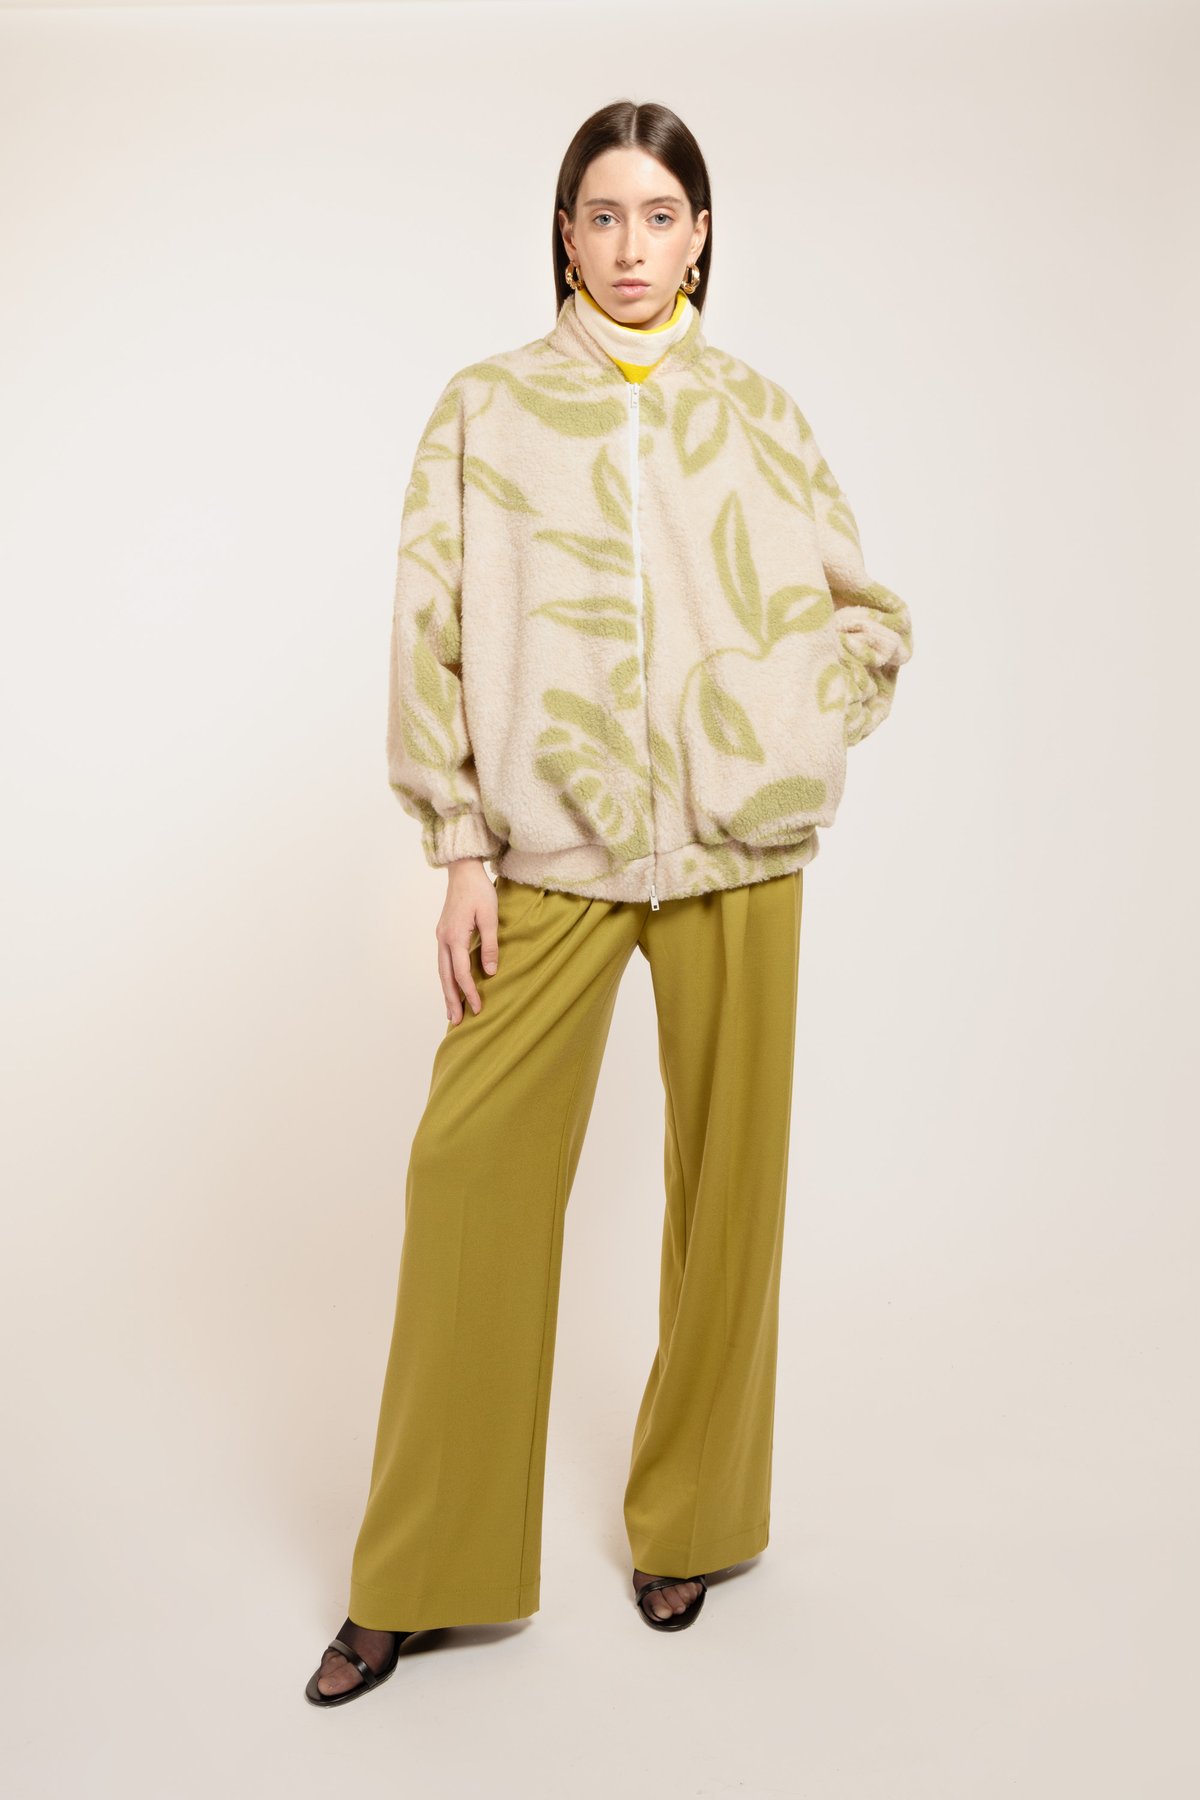 Image of GIACCA CANNES TEDDY MENTA/PANNA €226 - 50%